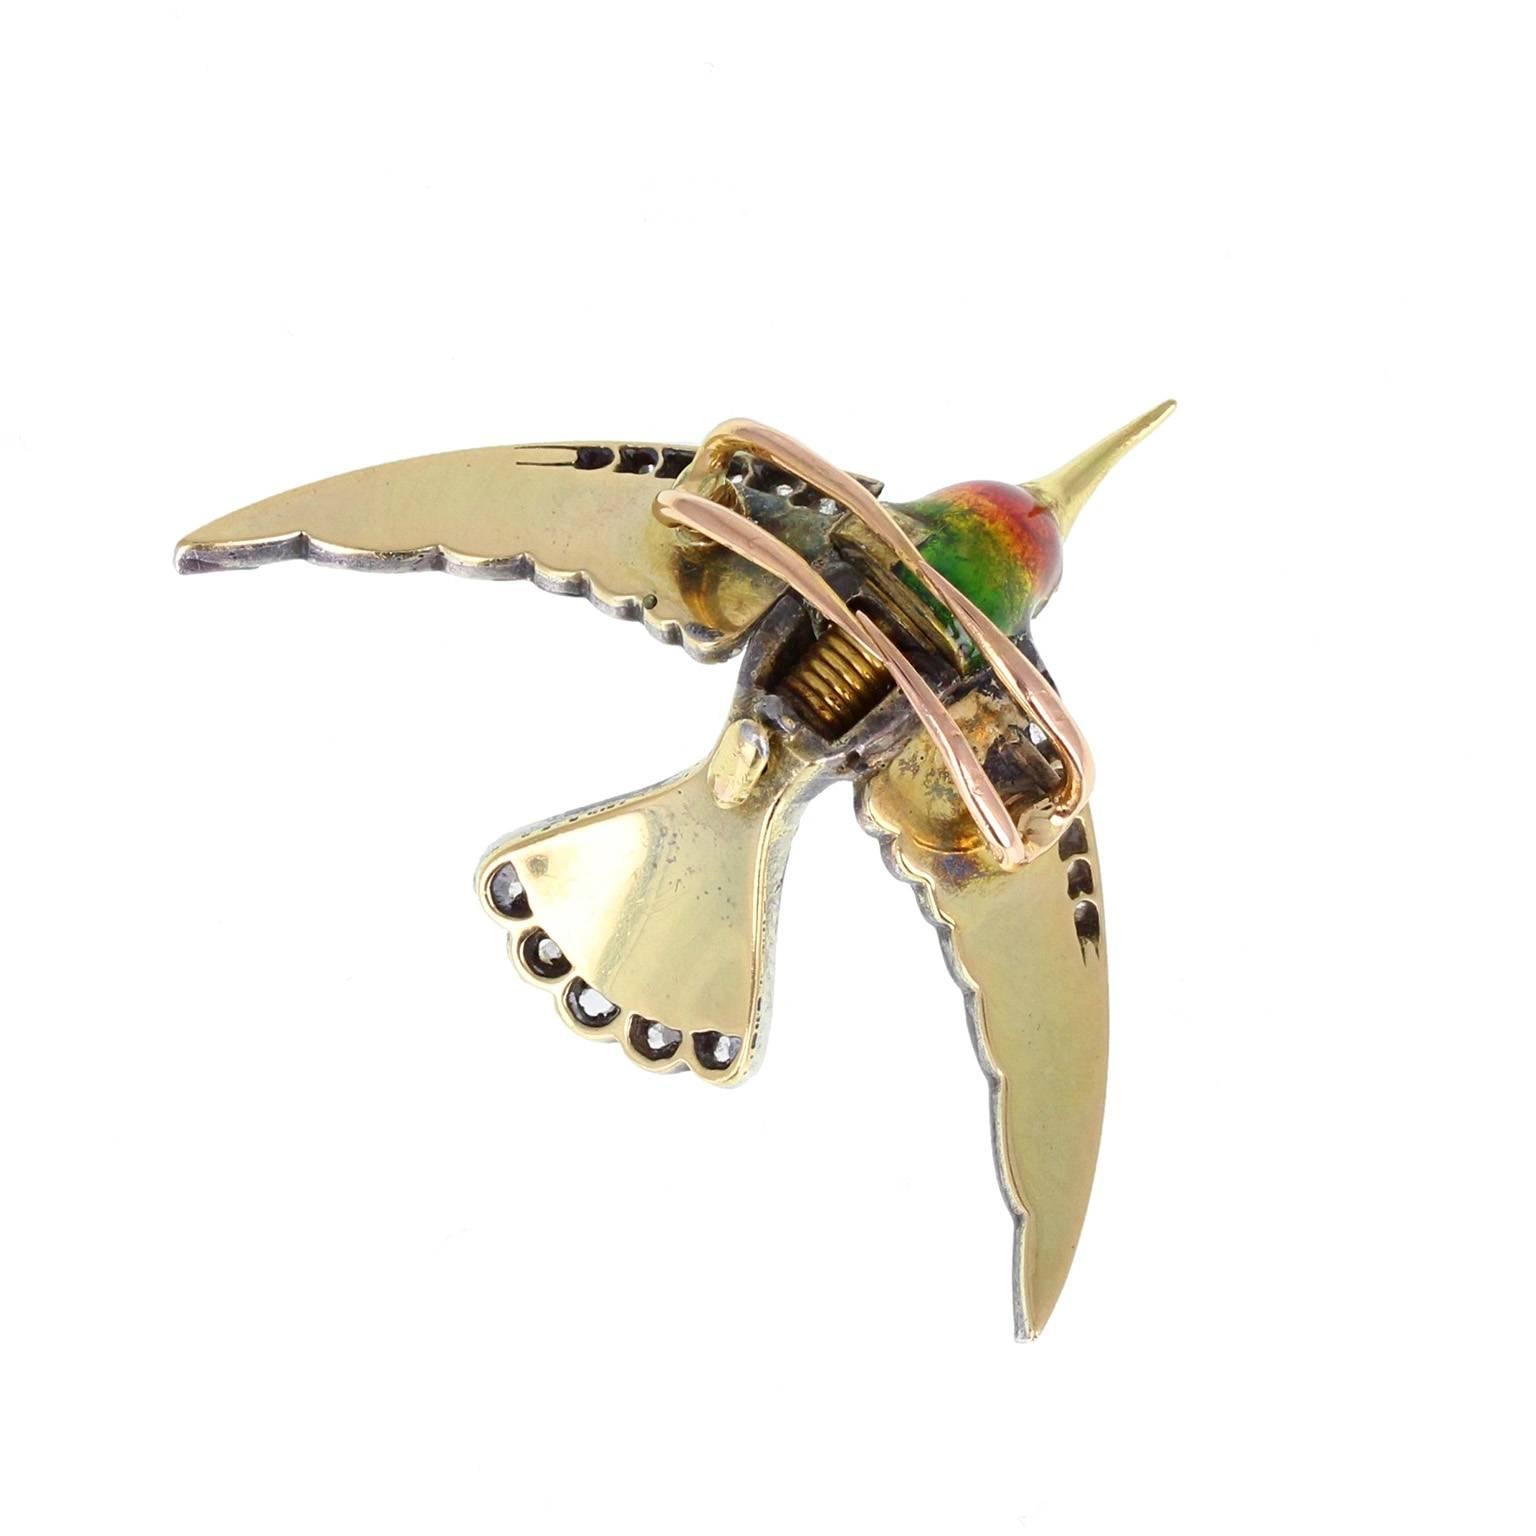  This delightful antique brooch is masterfully crafted in 18 carat gold. The body, wings and head enamelled with purple, turquoise, gold, green and red enamel and adorned with rose-cut diamonds. Hinged, sprung wings operate the ingenious clasp. A